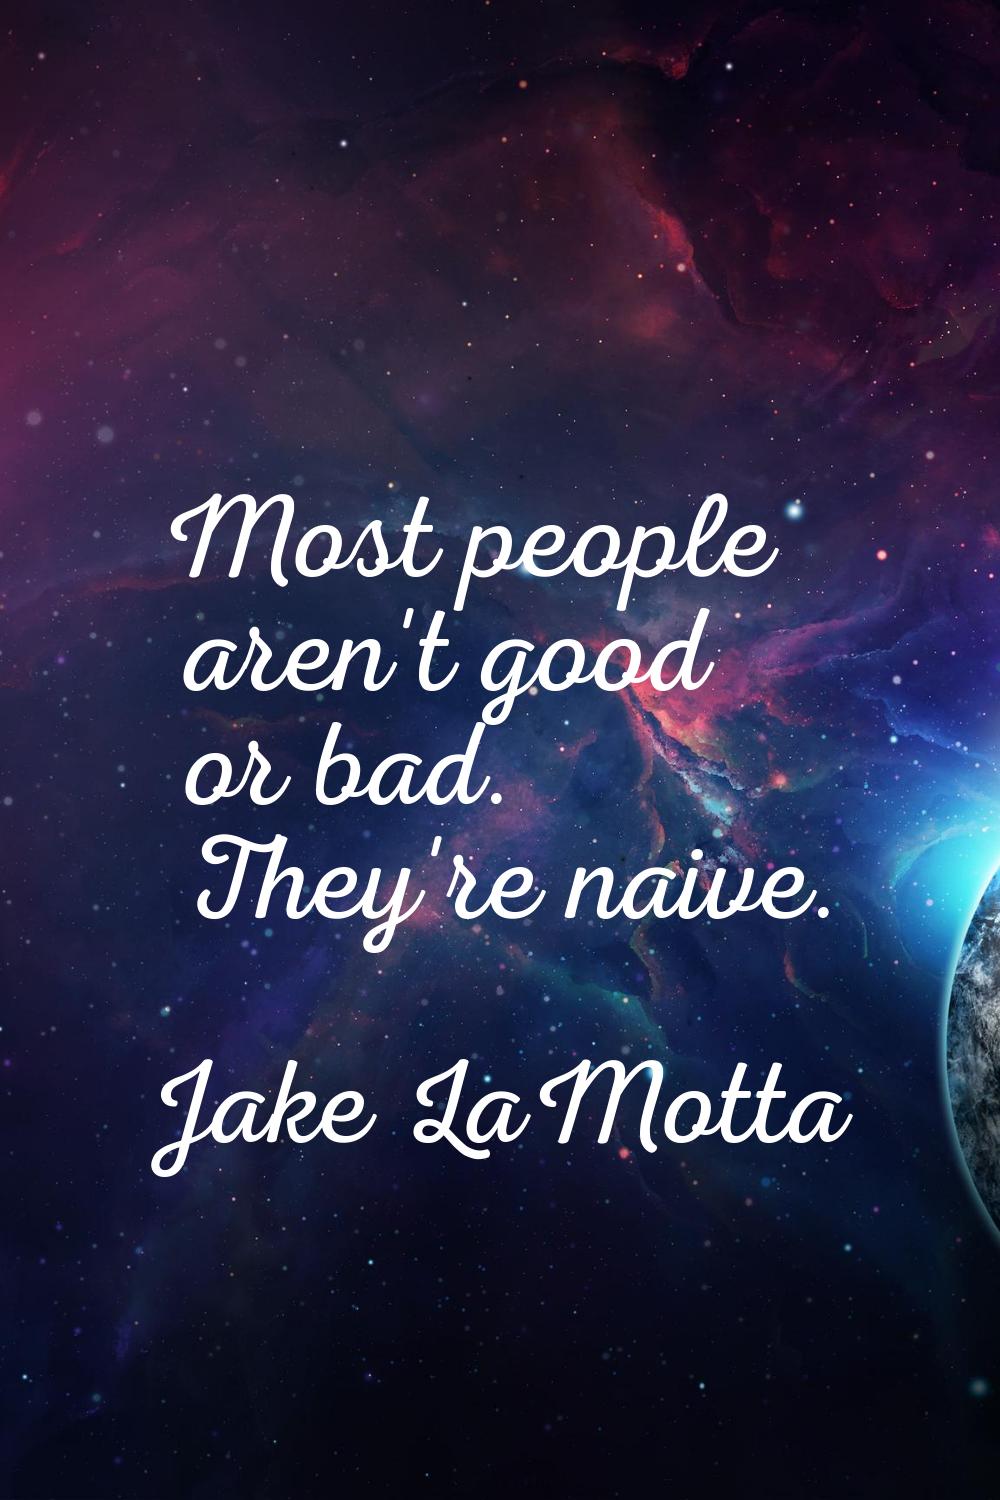 Most people aren't good or bad. They're naive.